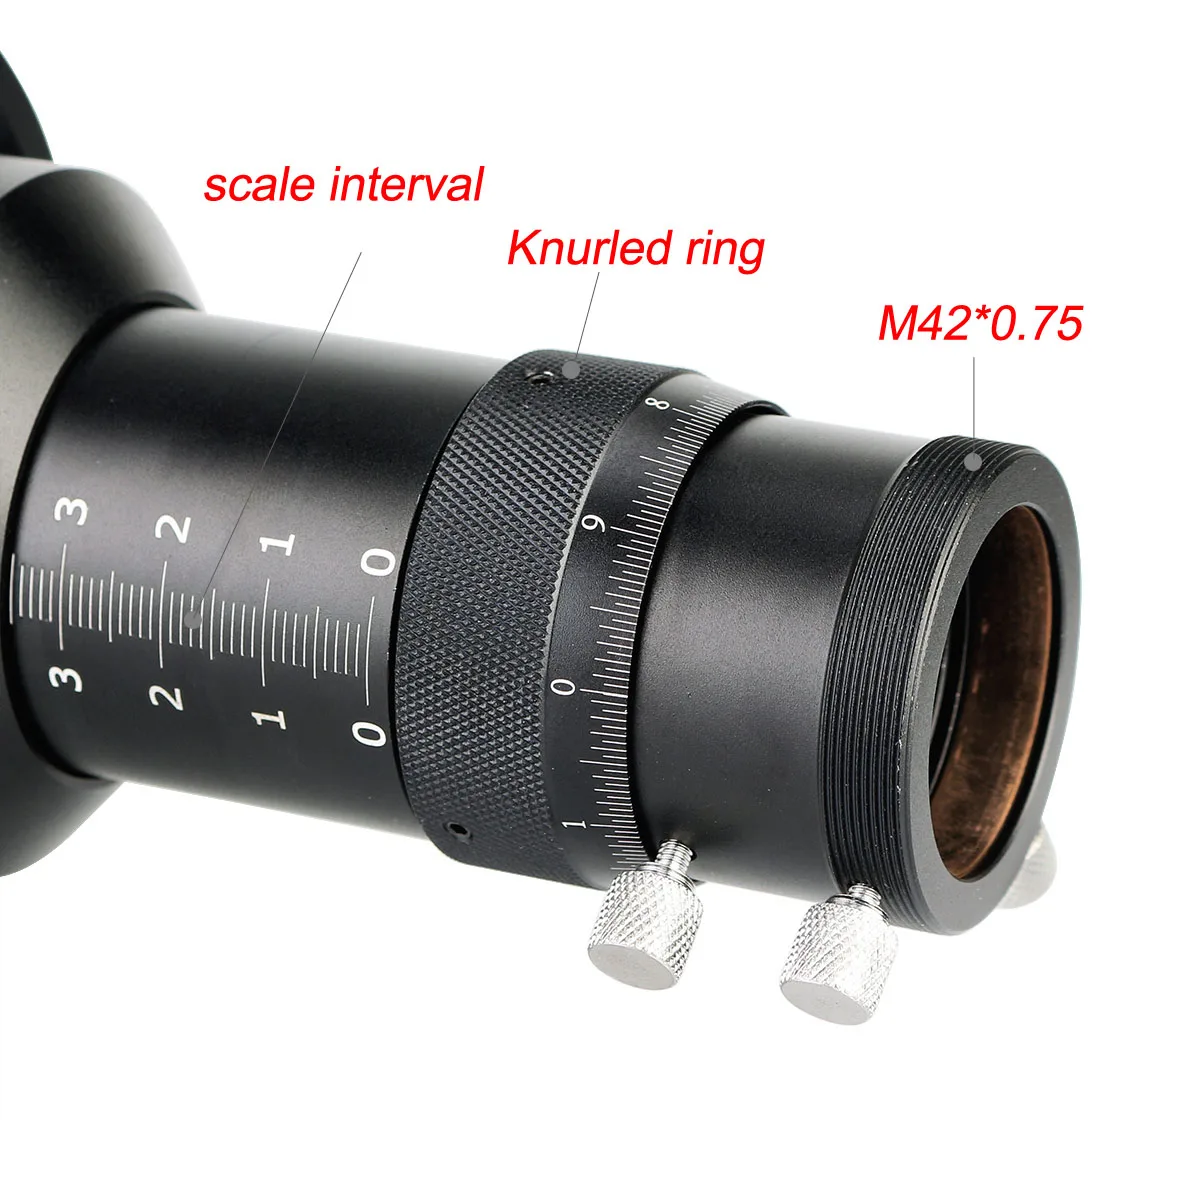 SVBONY Telescope Guide Scope 50mm/190 ,60mm/240mm,Compact Deluxe Guide Scope w/1.25